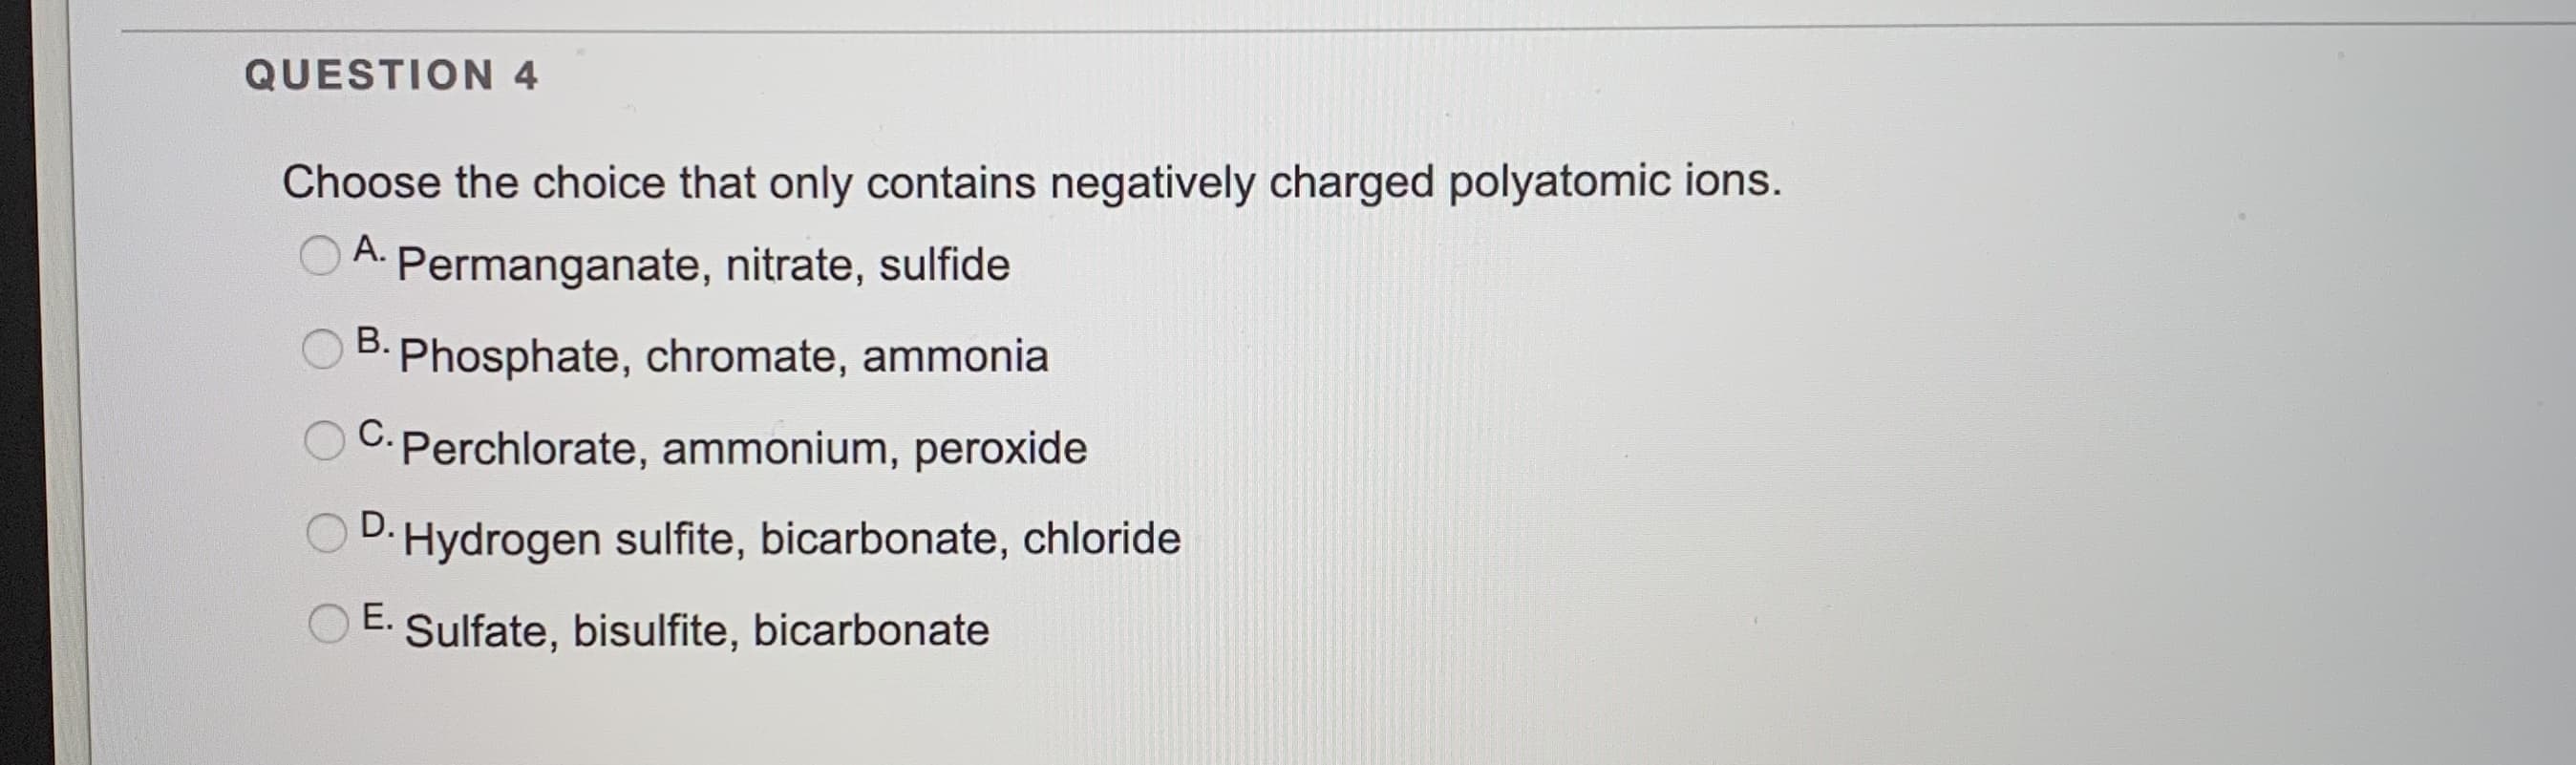 Choose the choice that only contains negatively charged polyatomic ions.
A.
Permanganate, nitrate, sulfide
Phosphate, chromate, ammonia
C. Perchlorate, ammonium, peroxide
Hydrogen sulfite, bicarbonate, chloride
E.
Sulfate, bisulfite, bicarbonate
